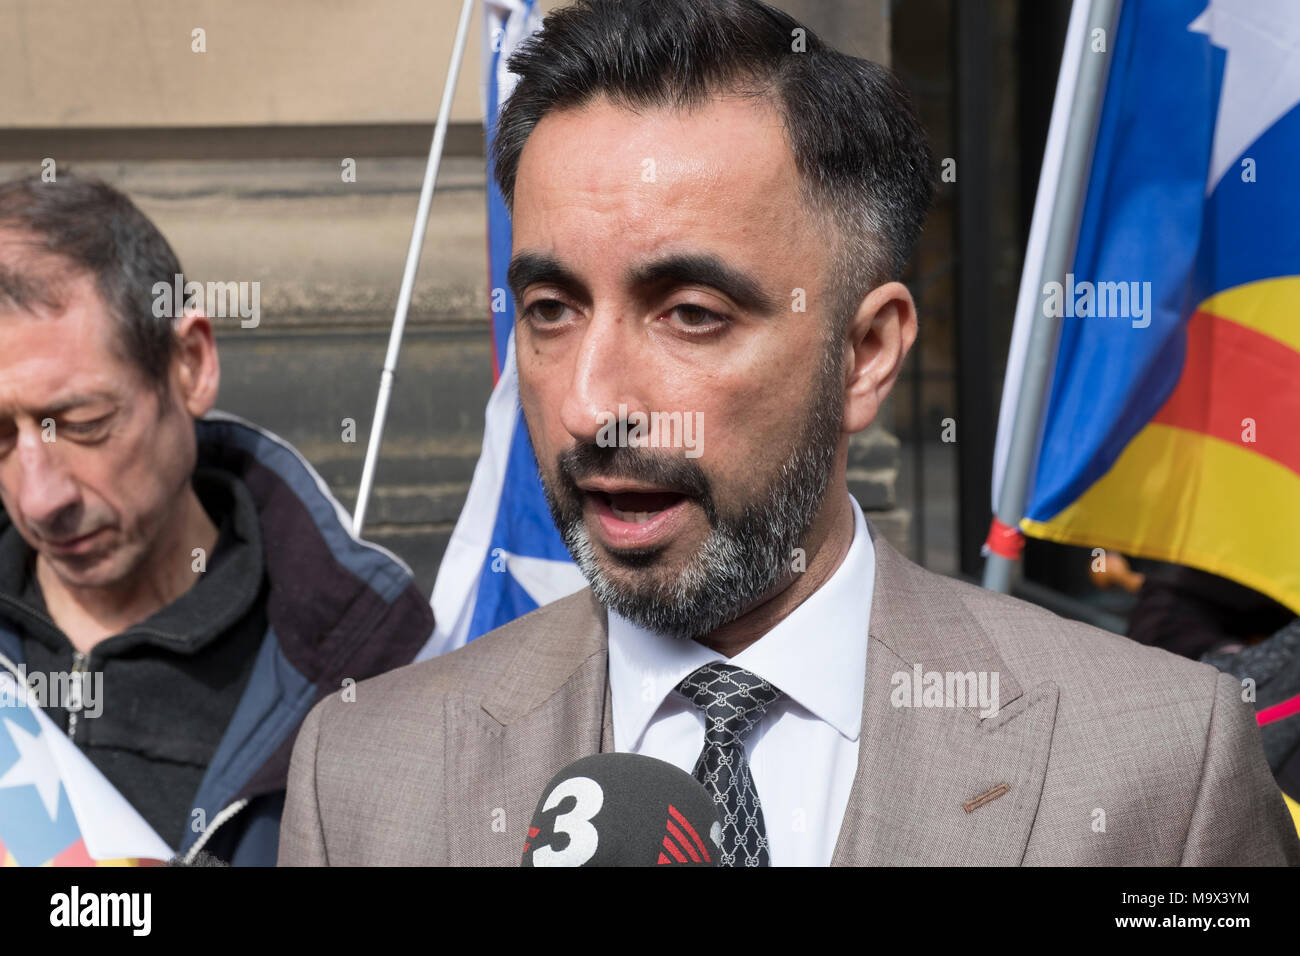 Edinburgh, Scotland,UK. 28 March 2018. Aamer Anwar lawyer of former Catalonia Education Minister and independence supporter Clara Ponsati outside Edinburgh Sheriff Court ahead of her bail hearing. Ponsati faces extradition to Spain. She was granted bail. Credit: Iain Masterton/Alamy Live News Stock Photo